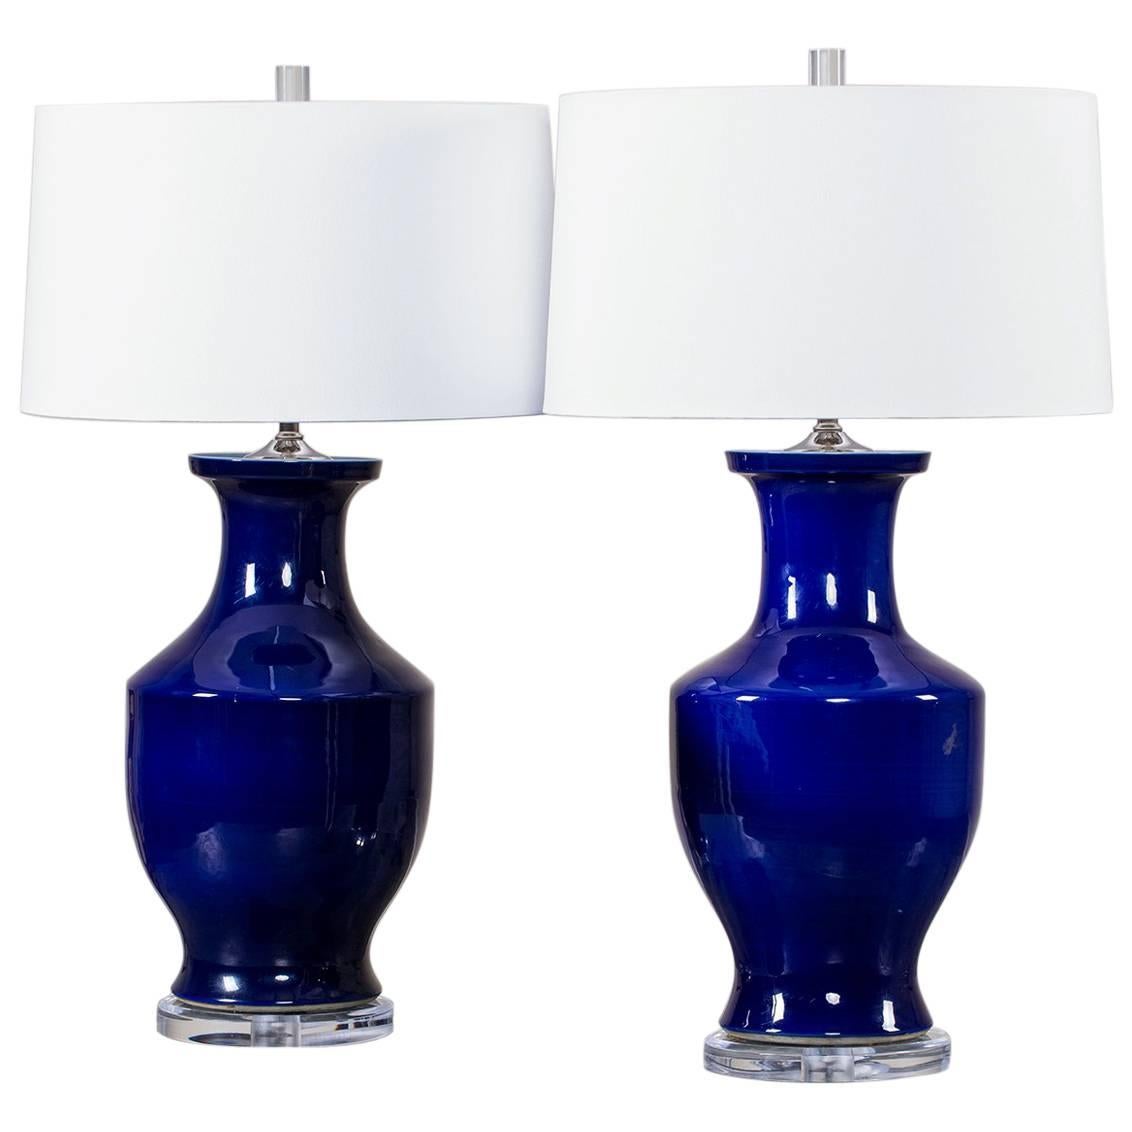 Pair of Vintage Cobalt Blue Chinese Vases, circa 1940 Mounted as Custom Lamps